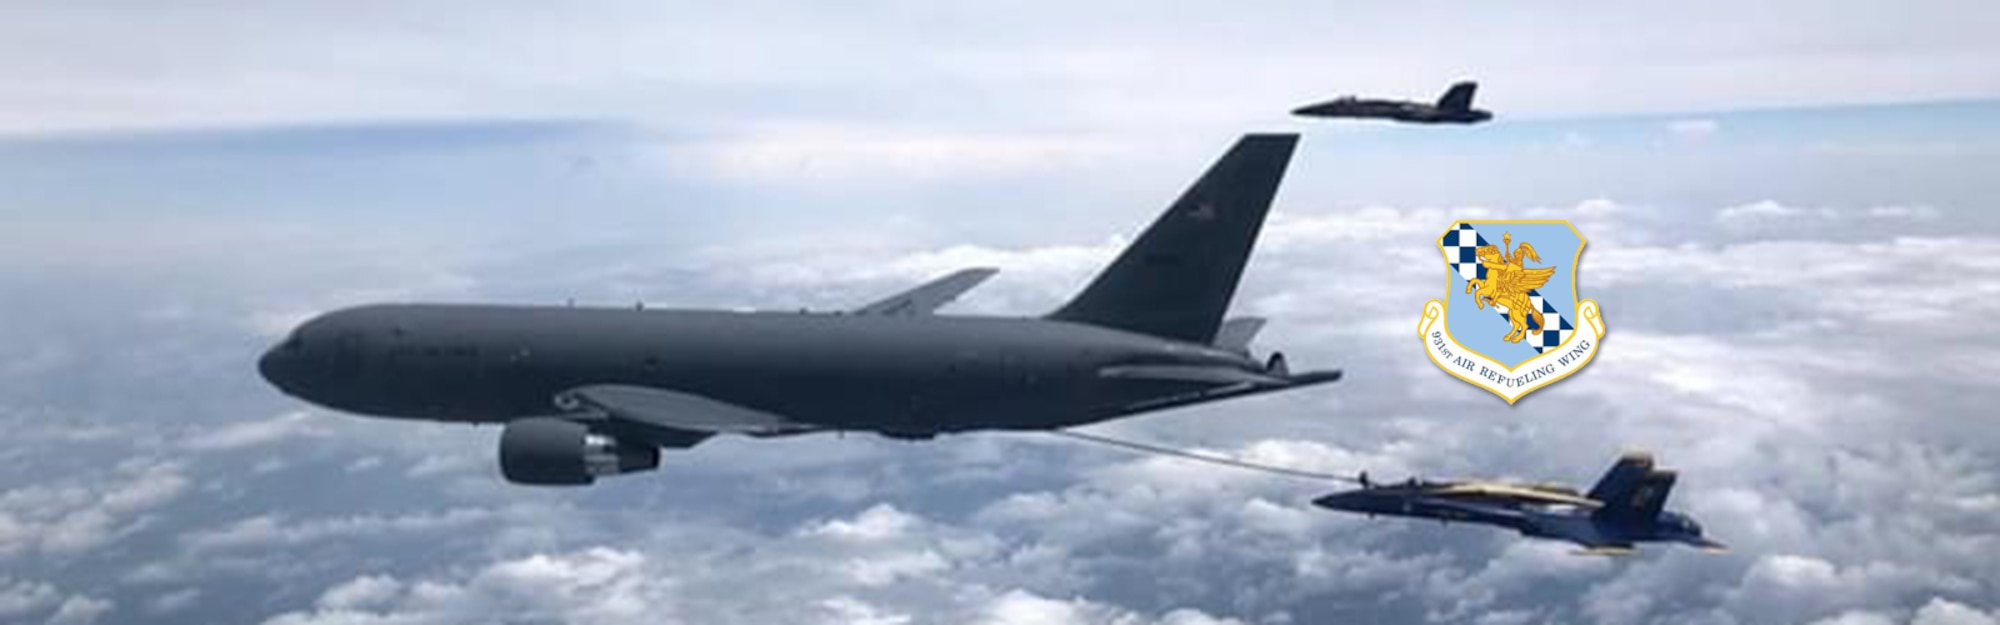 A KC-46 Pegasus assigned to the 931st Air Refueling Wing, McConnell Air Force Base, Kan., lines up to refuel an U.S. Navy Blue Angels F/A-18 Hornet, July 1, 2020 over South Dakota. This marks the first time the 931st ARW refueled the Blue Angels using a KC-46. The KC-46 represents the beginning of a new era in air-to-air refueling capability to support the U.S. Air Force, Navy and Marine Corps. The modernized fly-by-wire boom provides a larger air-refueling envelope than the KC-46’s predecessor, the KC-135 Stratotanker. In addition to the boom, the aircraft is capable of refueling through drogue and wing aerial fueling pods, or WARPs, to provide simultaneous multi-point air refueling. (U.S. Air Force photo by Maj. Andrea Morris)